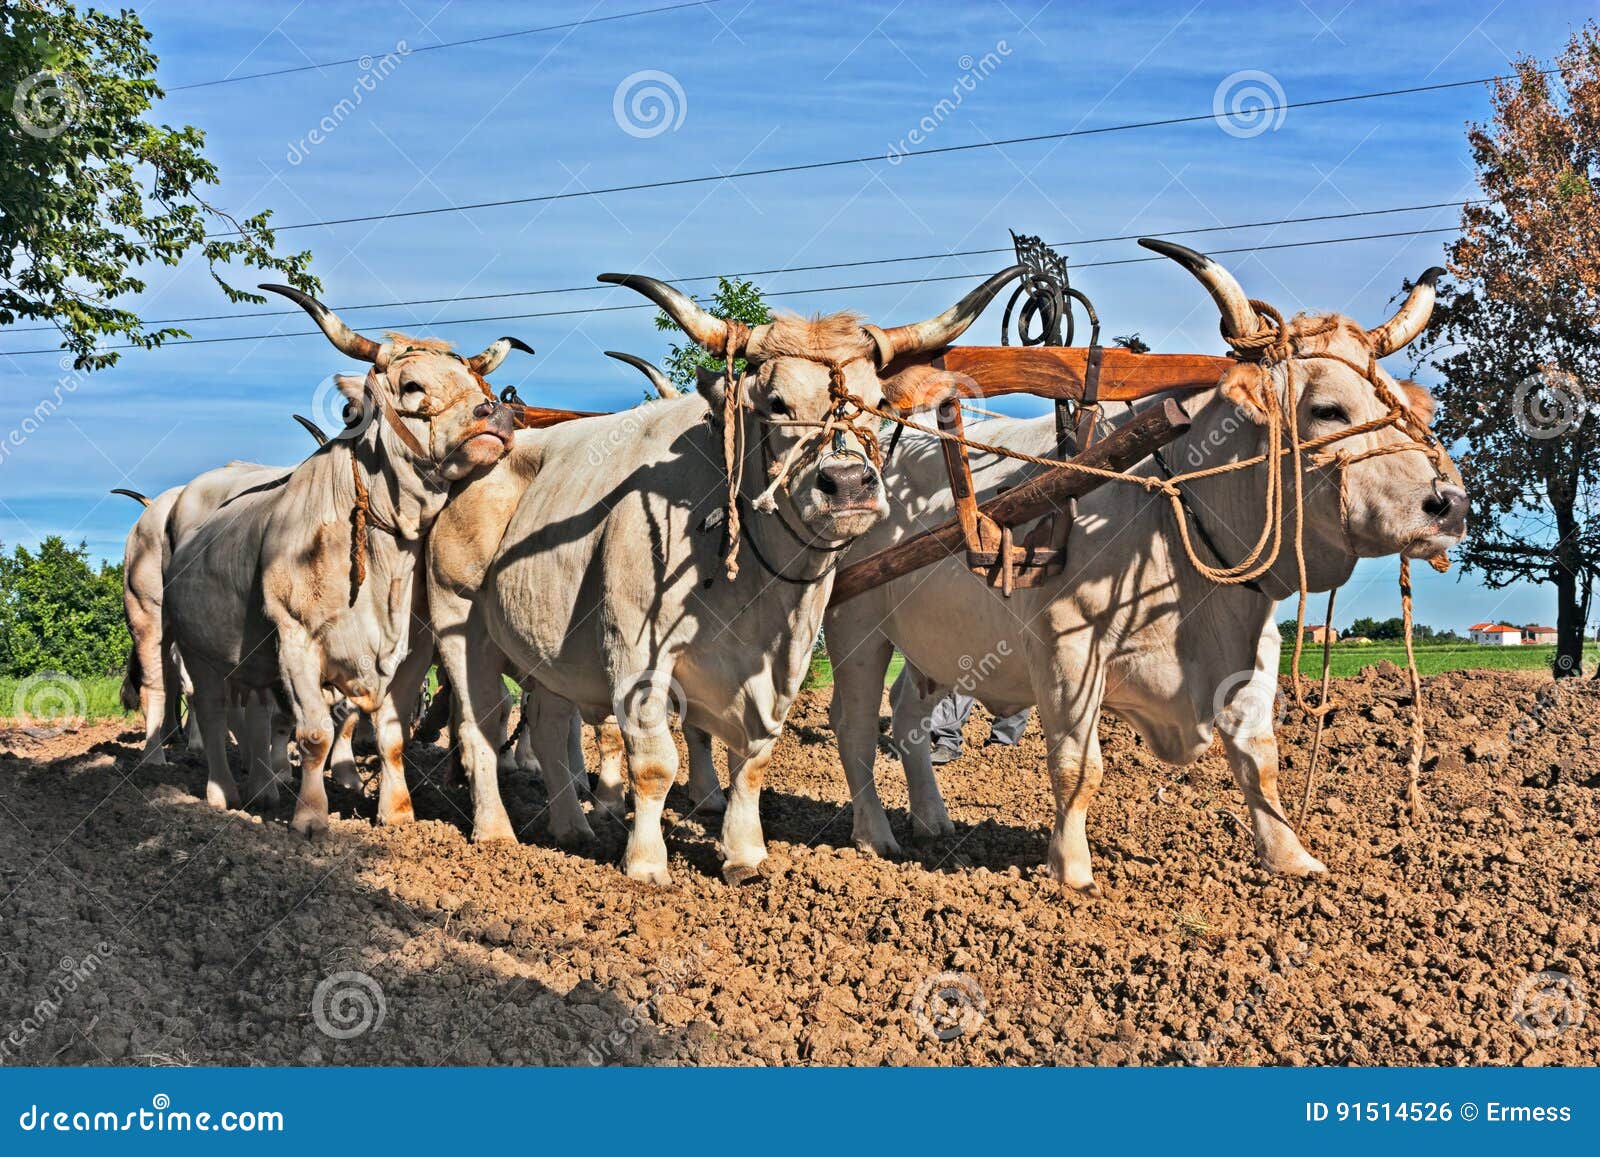 oxen that pull the plow